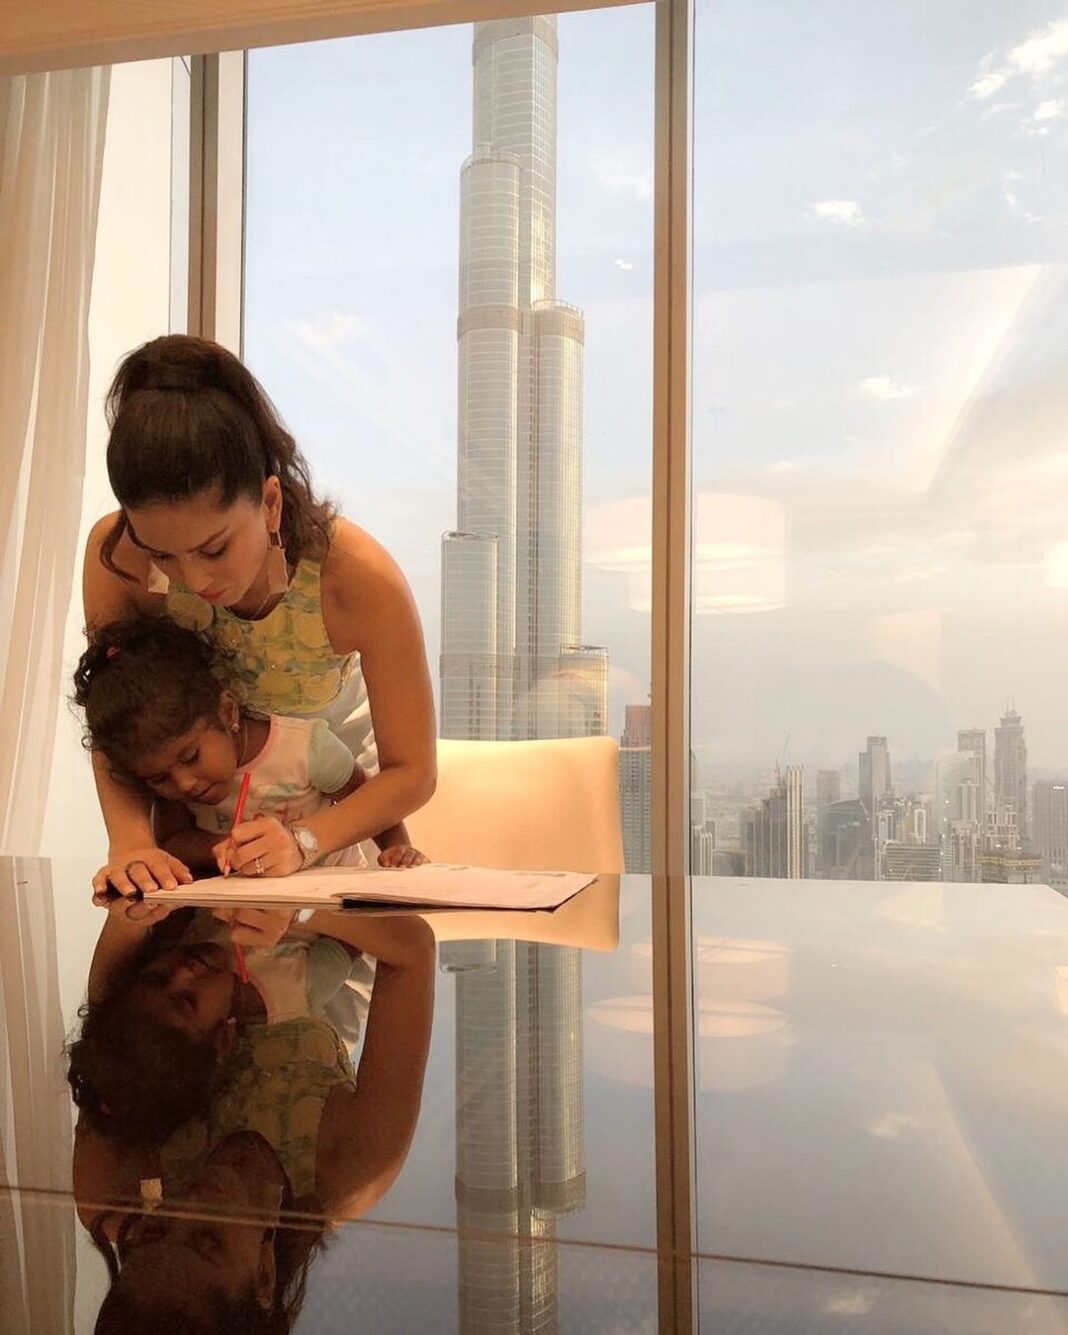 Sunny Leone Instagram - On vacation but I believe in consistency with my daughter. Helping her finish the homework assignment I set for her :) Beautiful Burj Khalifa in the background!! Dubai, United Arab Emirates